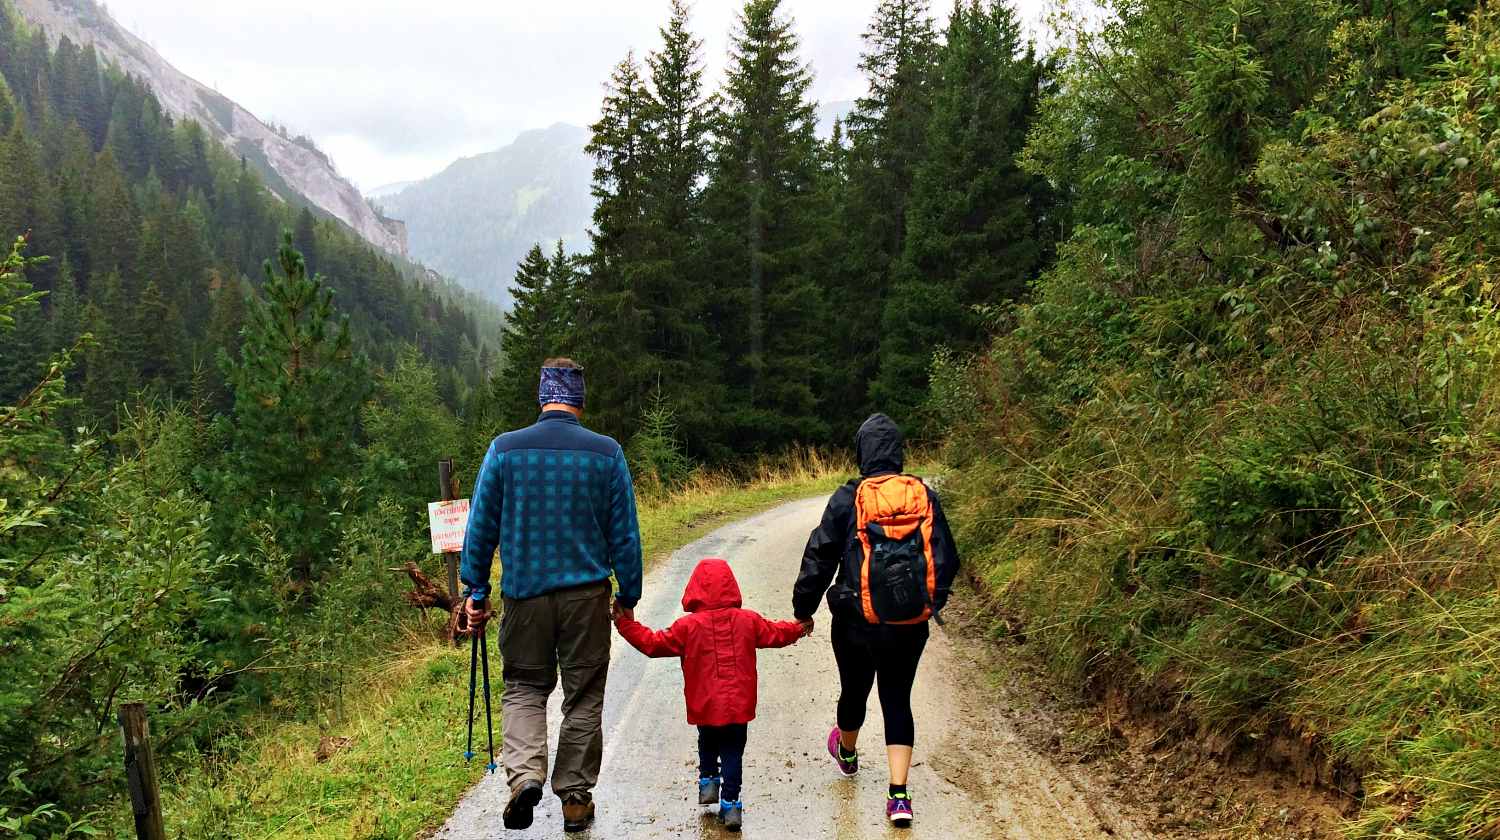 Feature | Family walking together | Family Preparedness: What Are Your Survival Principles?